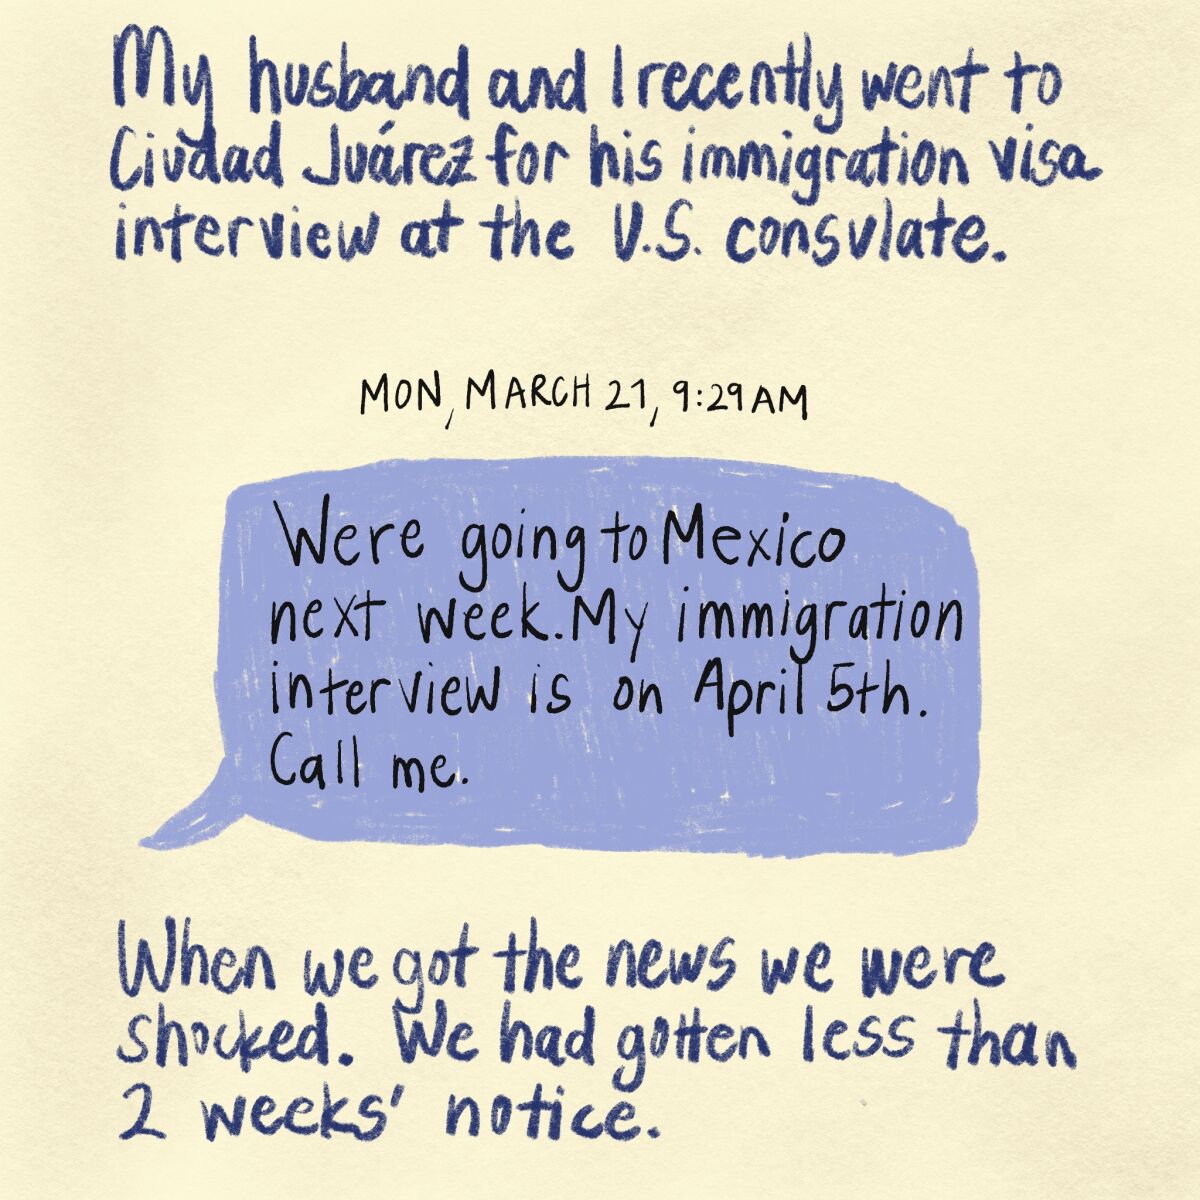 "My husband and I recently went to cuidad Jaurez for his immigration visa interview at the U.S. consulate"